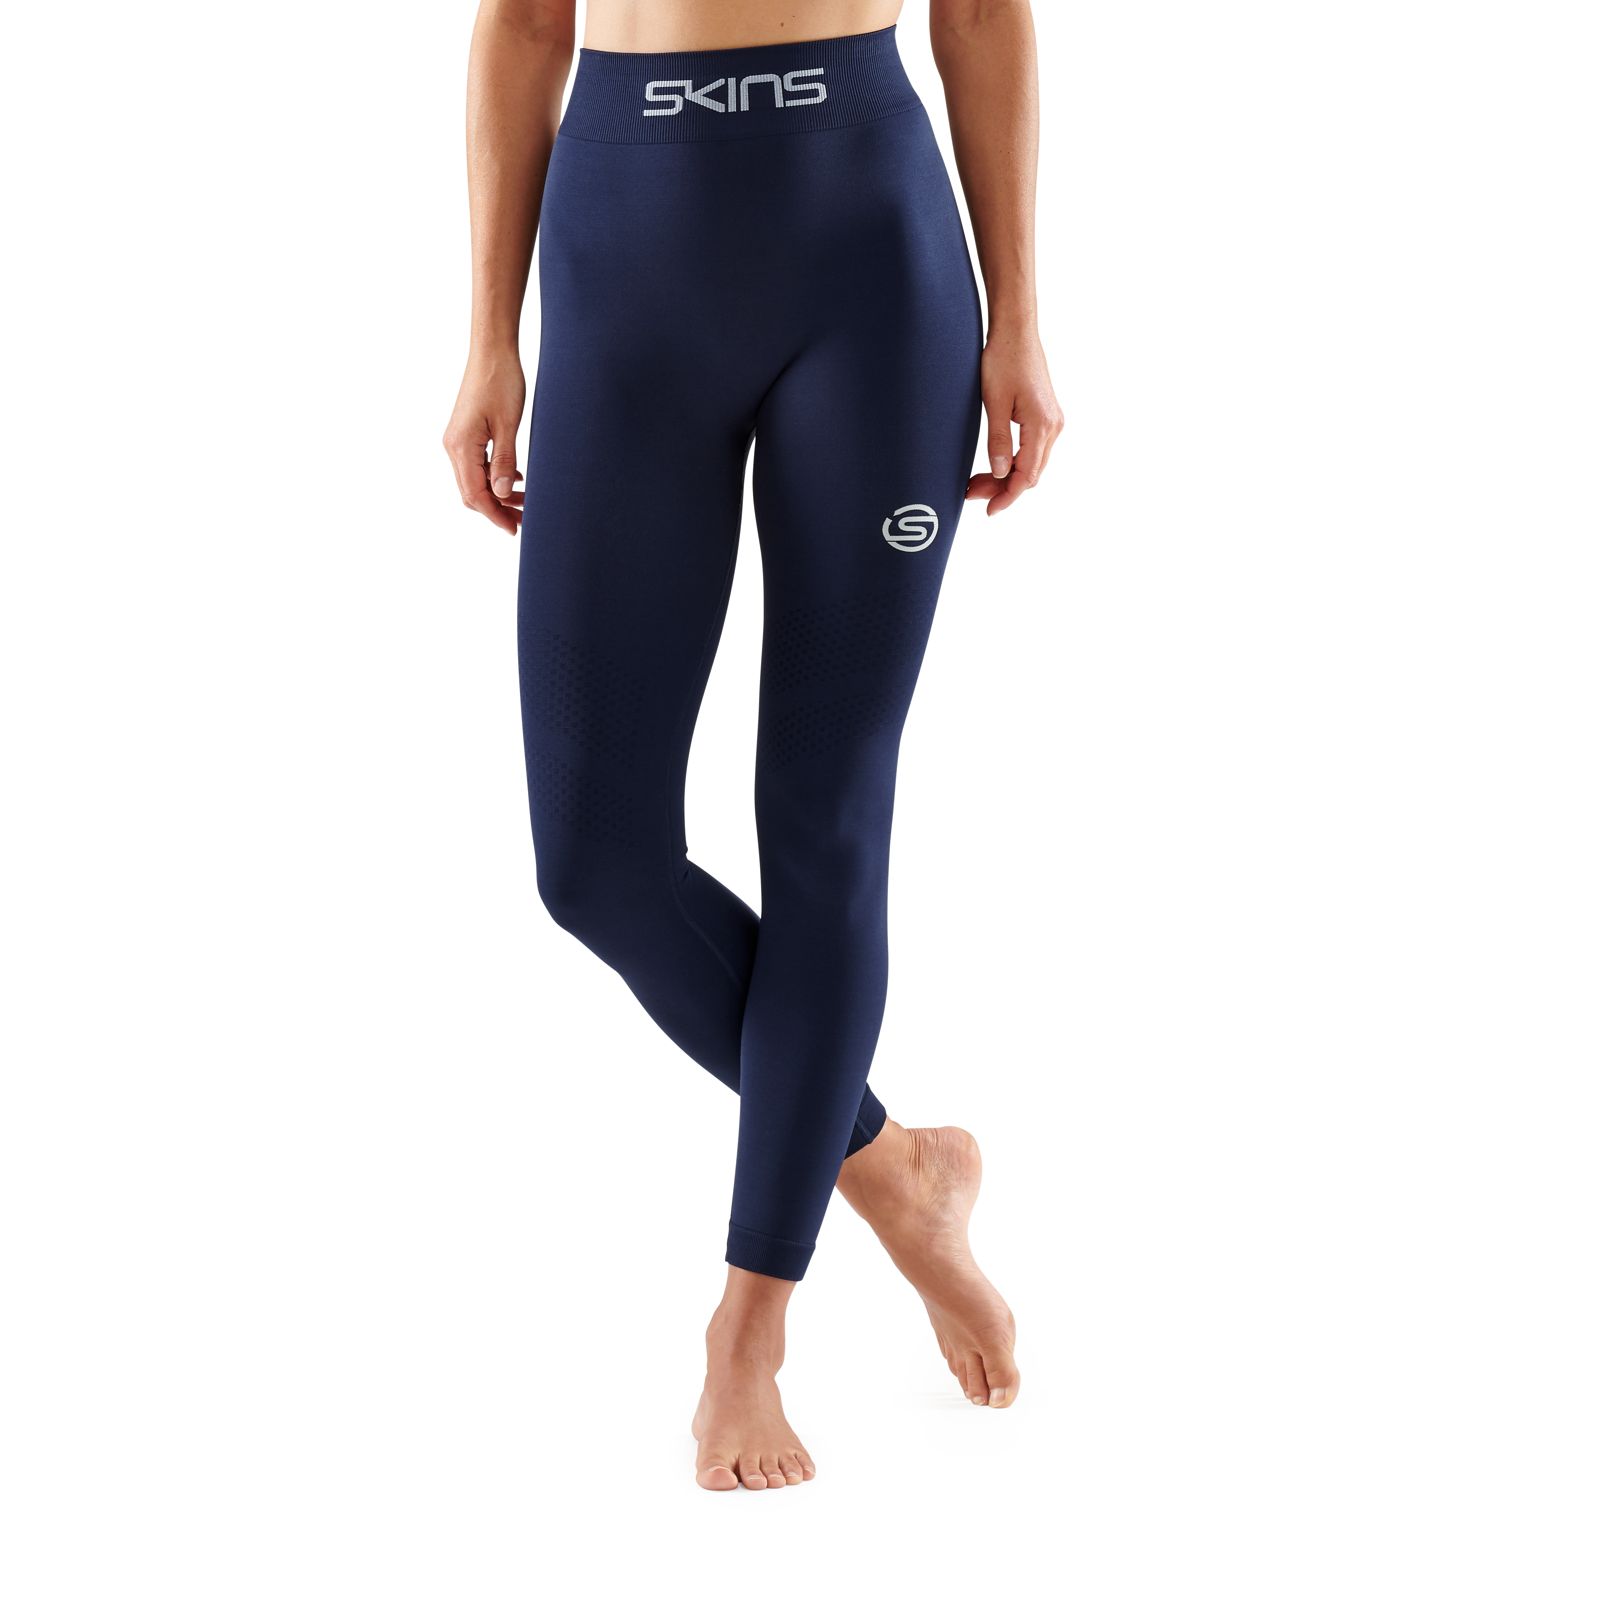 SKINS SERIES-3 WOMEN'S SEAMLESS LONG TIGHTS NAVY BLUE - SKINS Compression EU